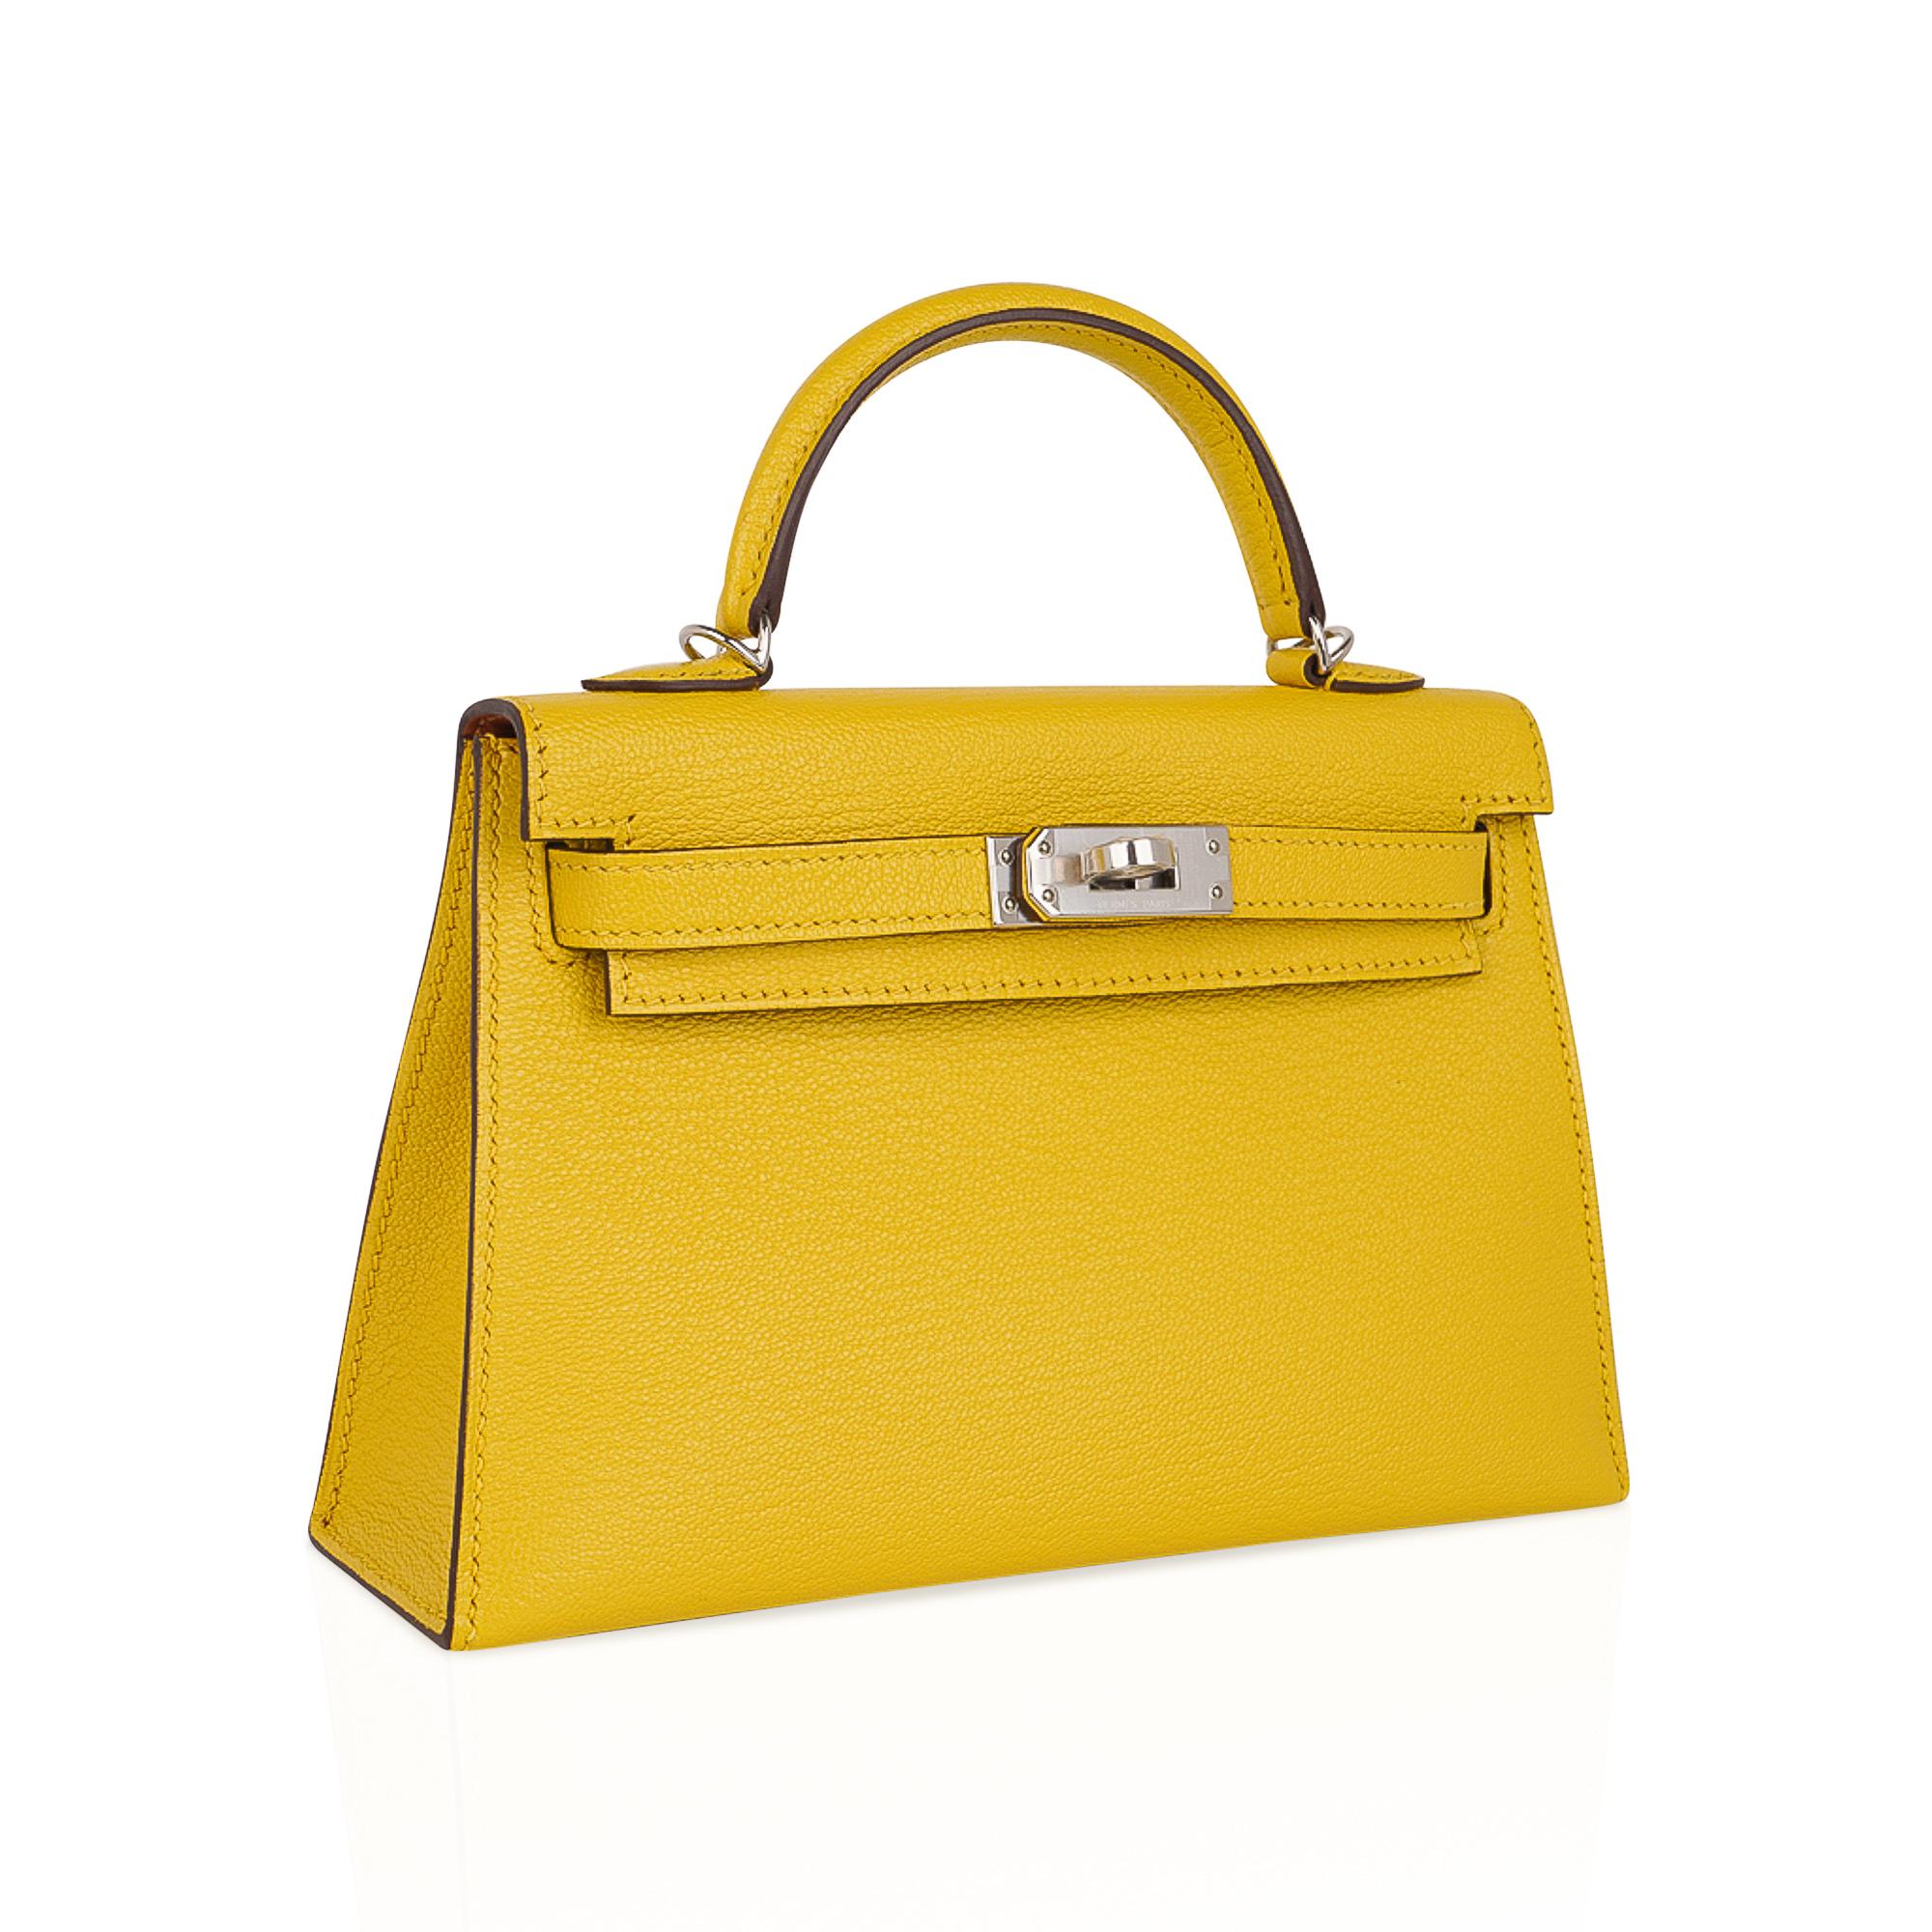 Mightychic offers an Hermes Kelly 20 Mini Sellier Verso bag featured in fabulous Jaune de Naples.
This Hermes Kelly 20 is accentuated with Gold interior.
Beautifully saturated Chevre leather with fresh palladium hardware.
Comes with signature Hermes